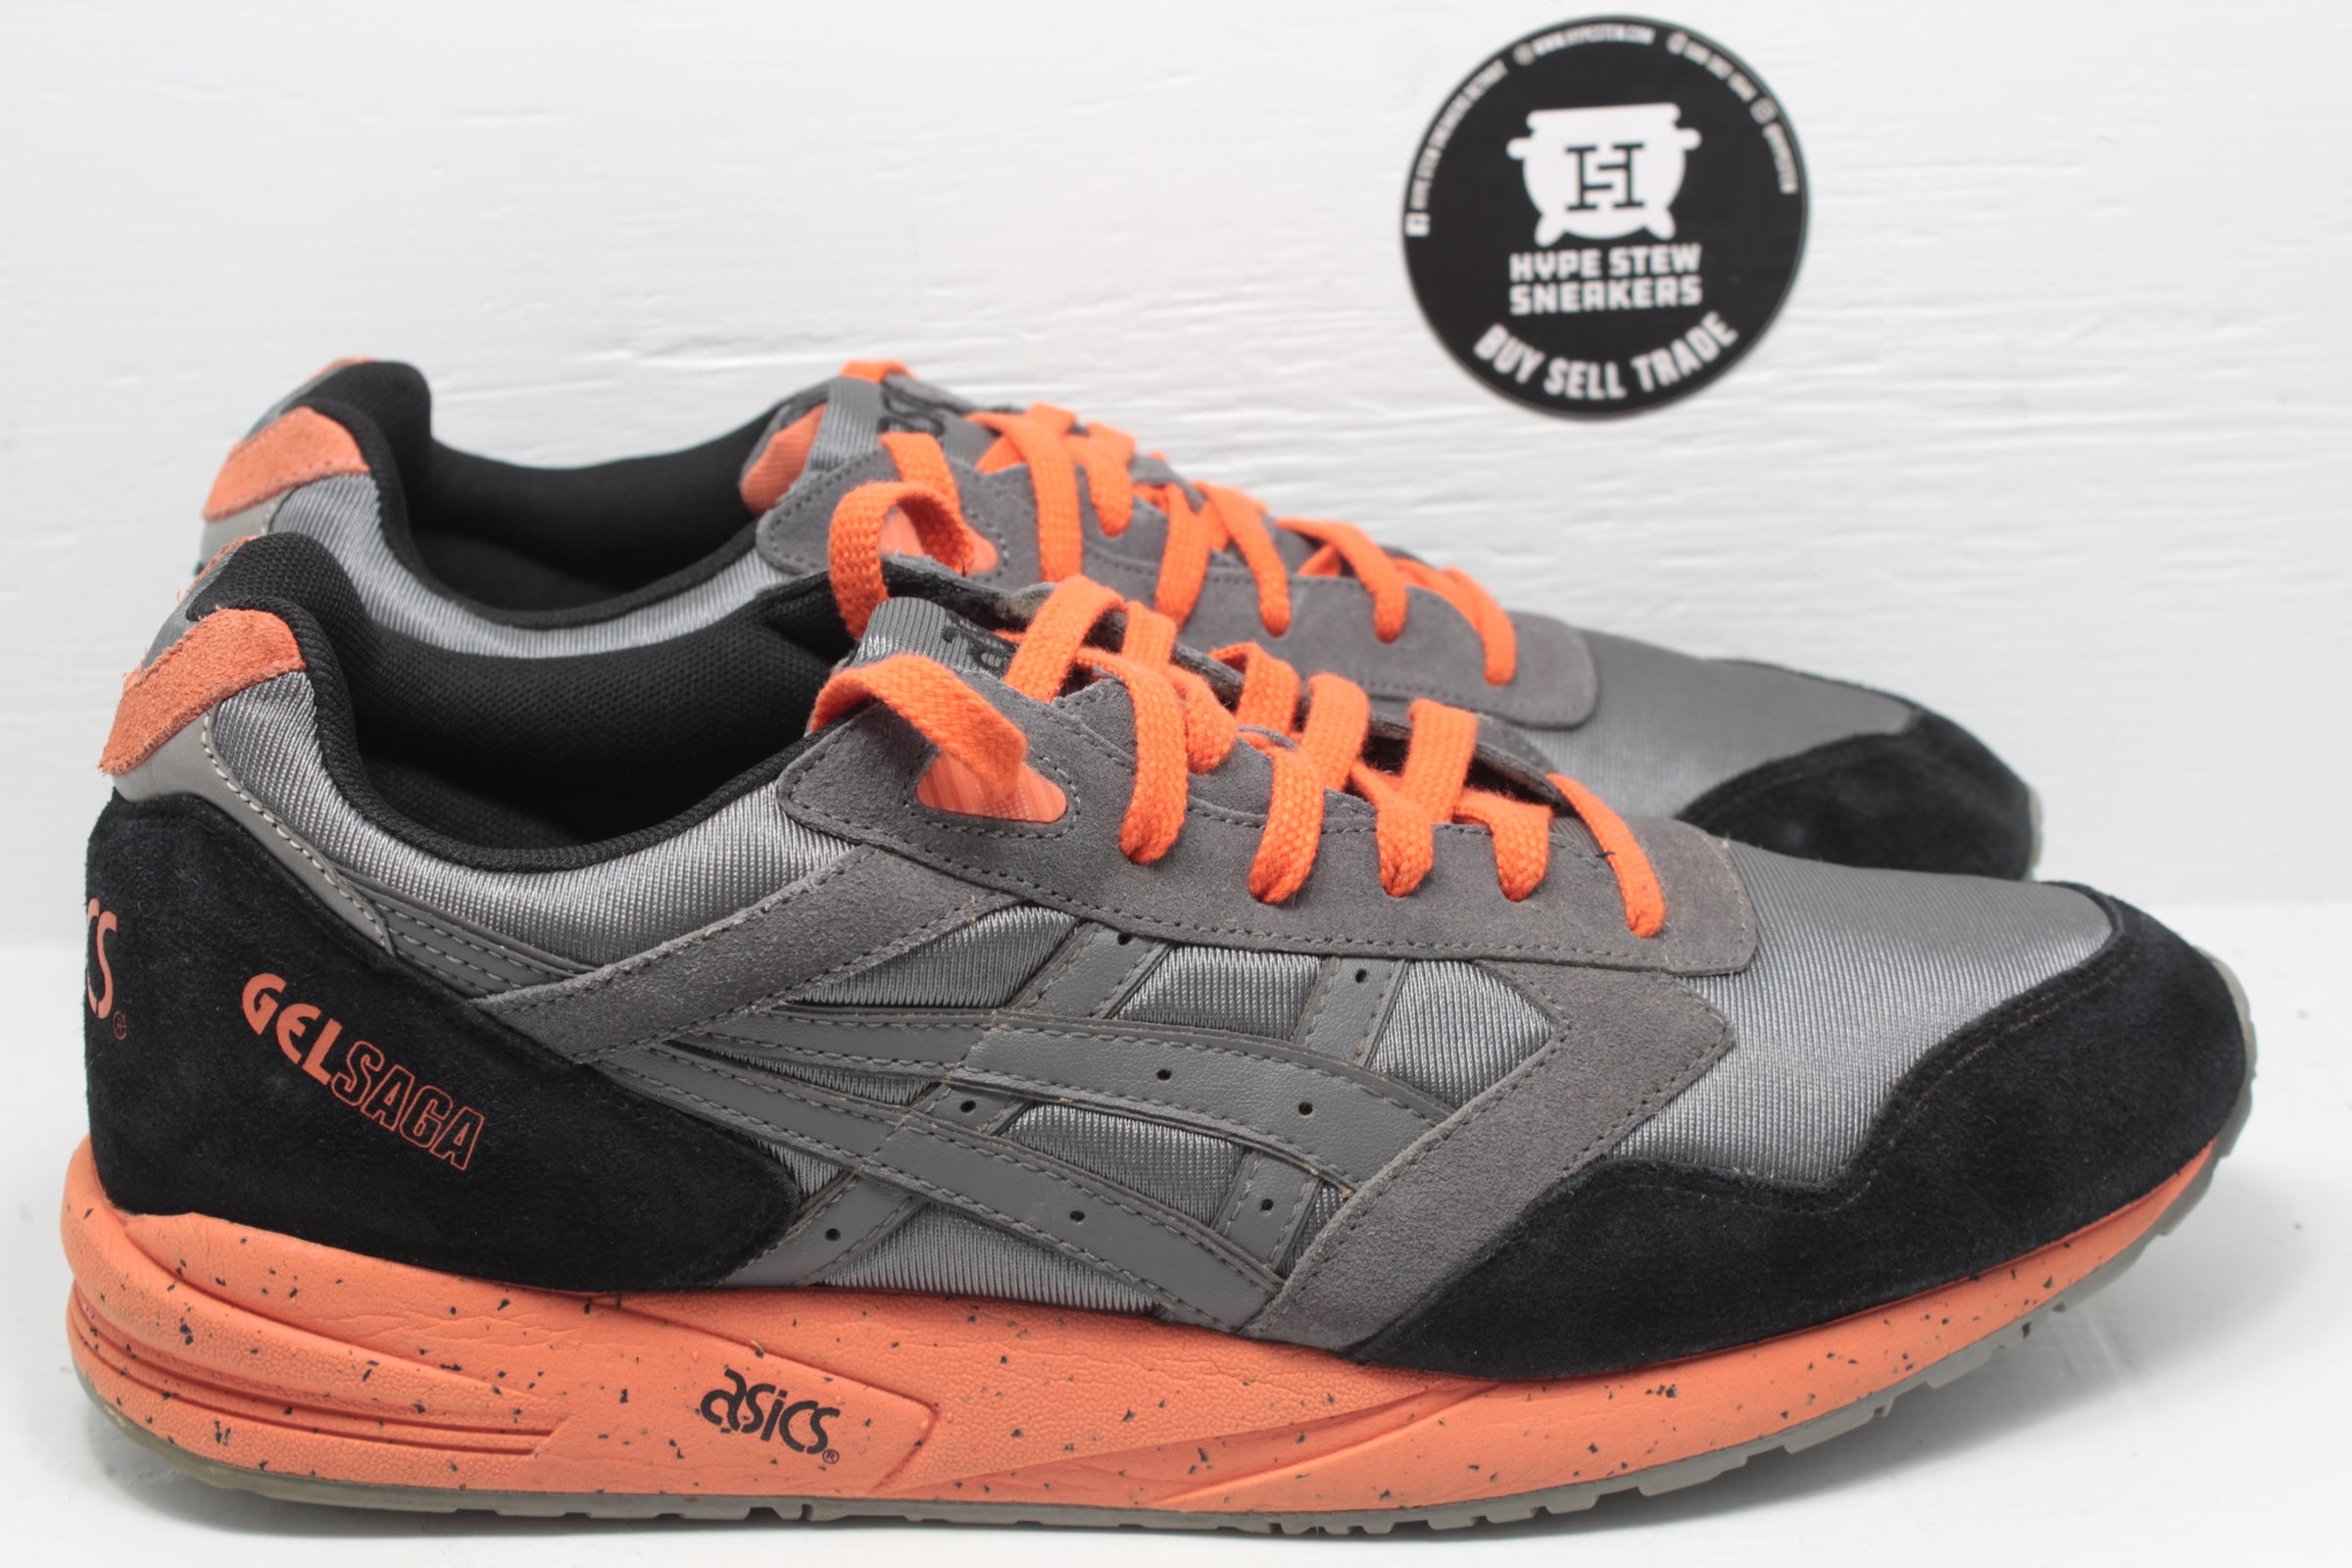 ASICS Tiger Hype Stew Sneakers Detroit